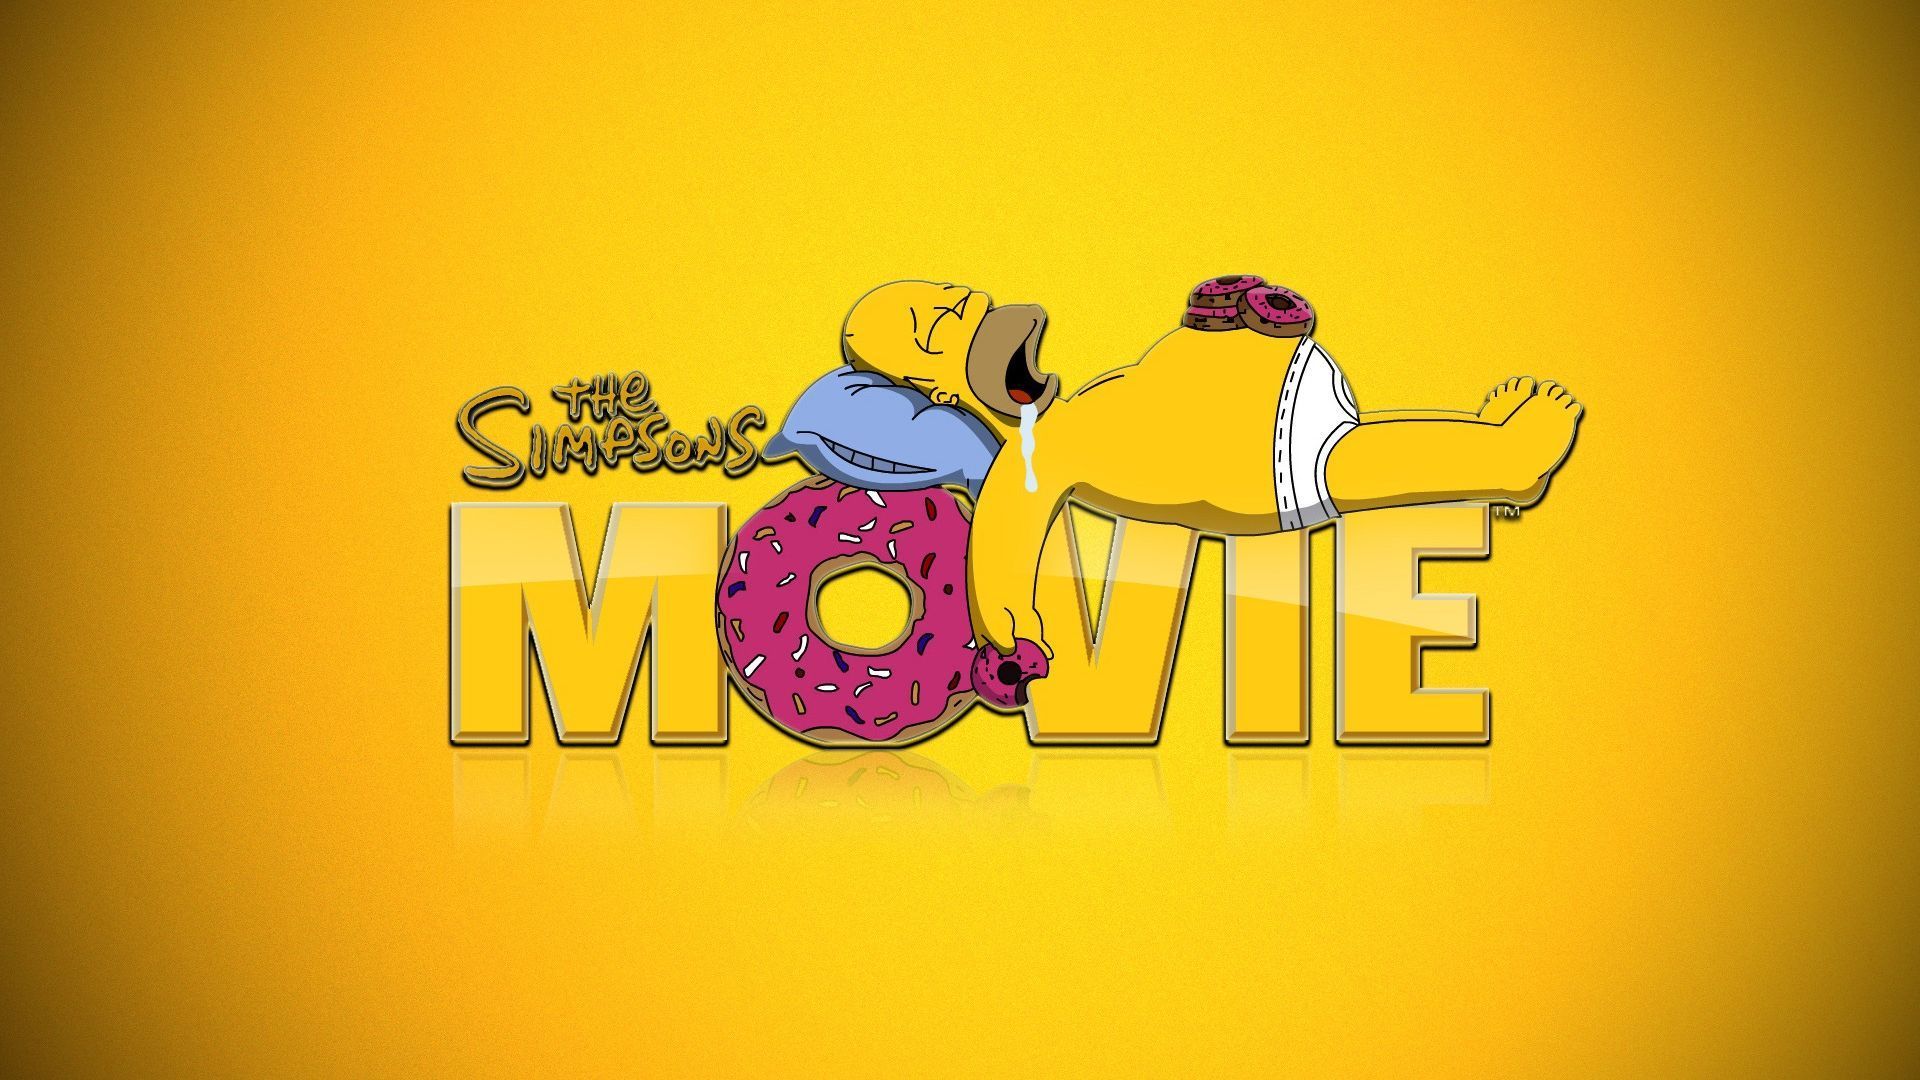 The Simpsons Movie Wallpapers HD Wallpapers 1920x1080